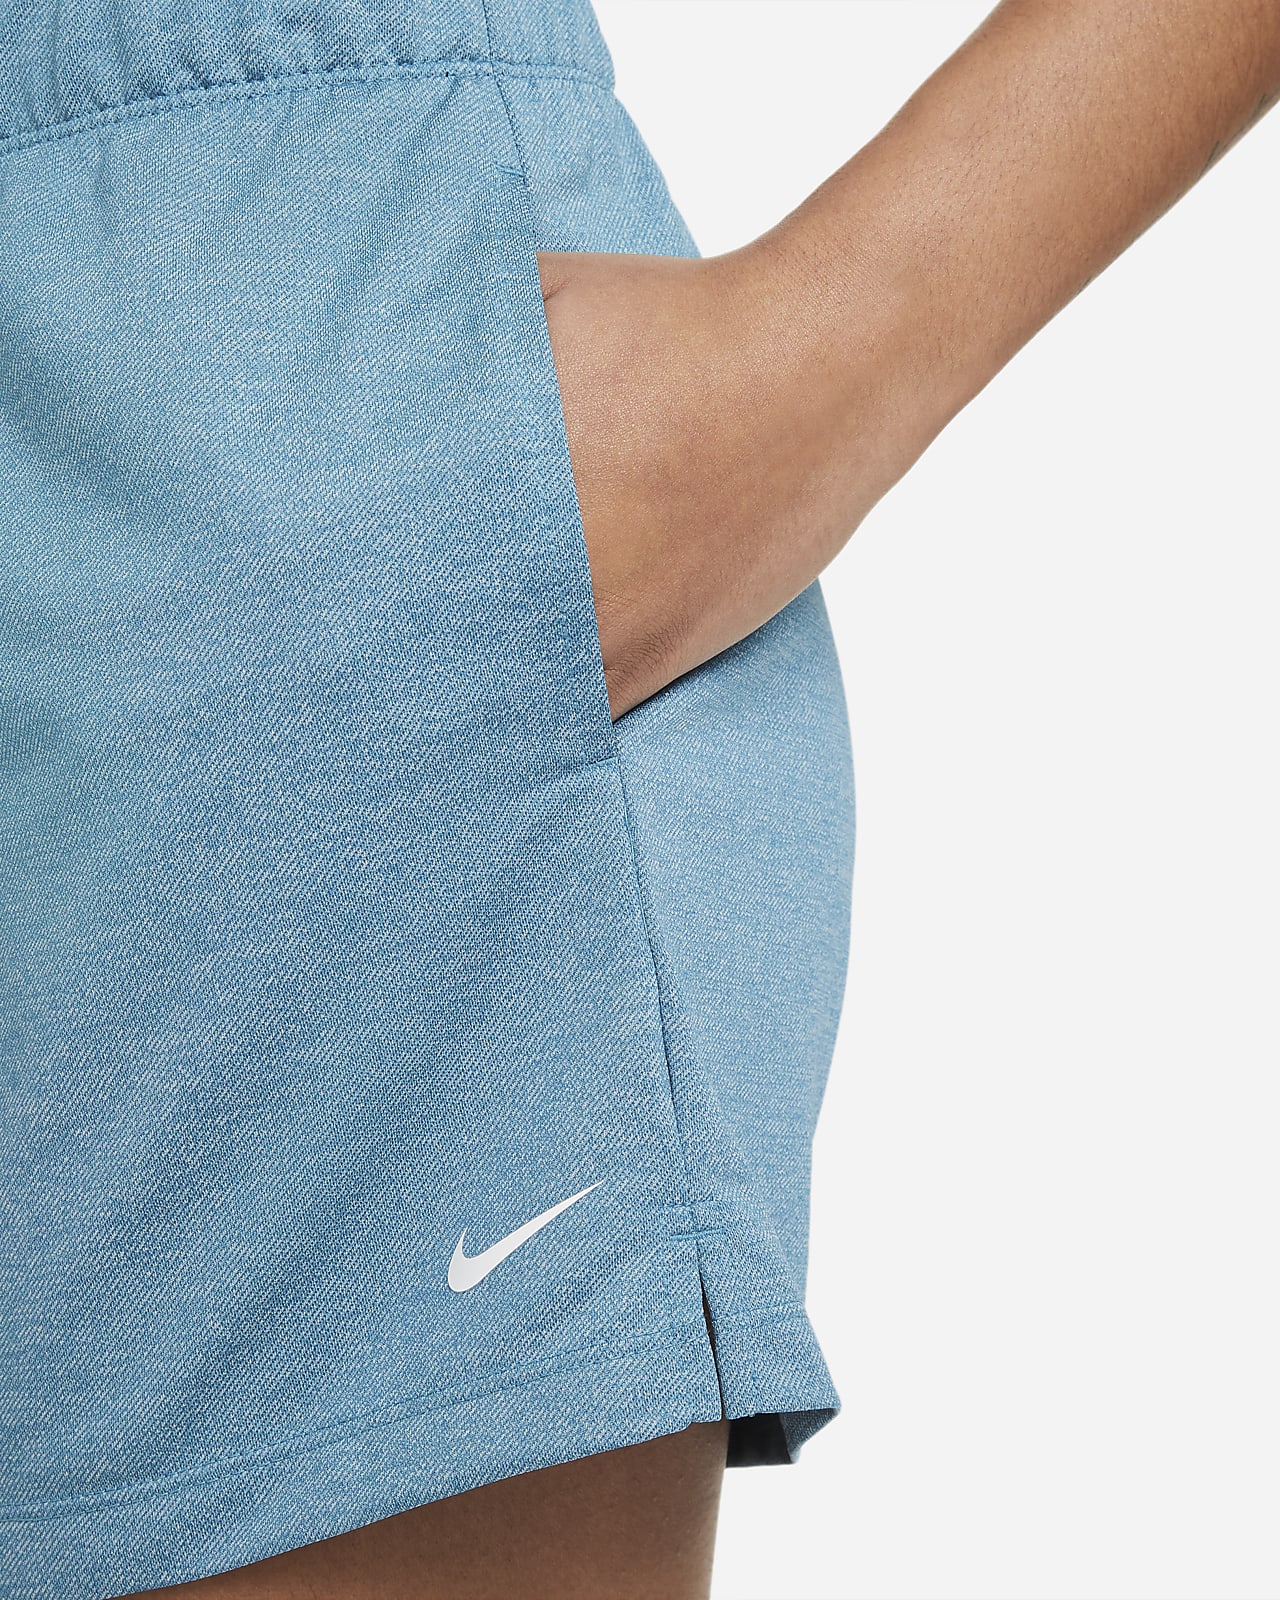 nike dry attack shorts